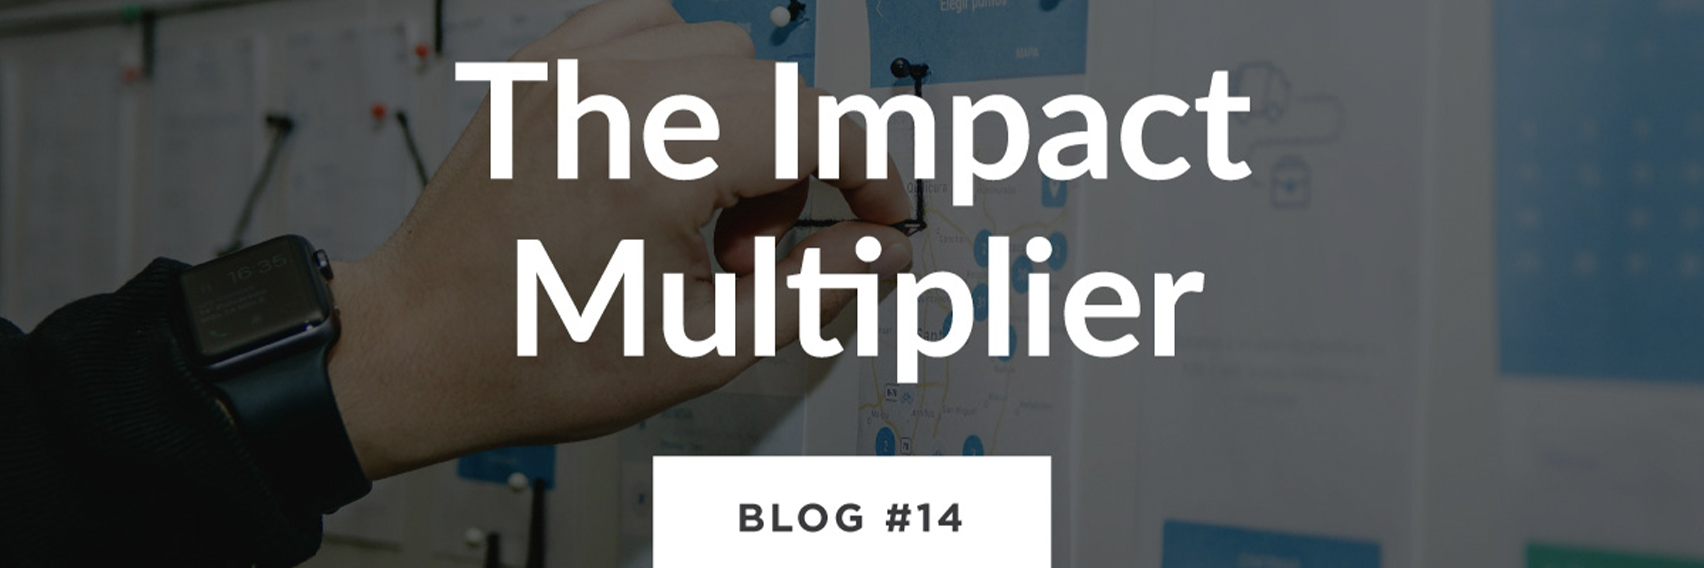 Graphic title for blog #14, 'The Impact Multiplier'.